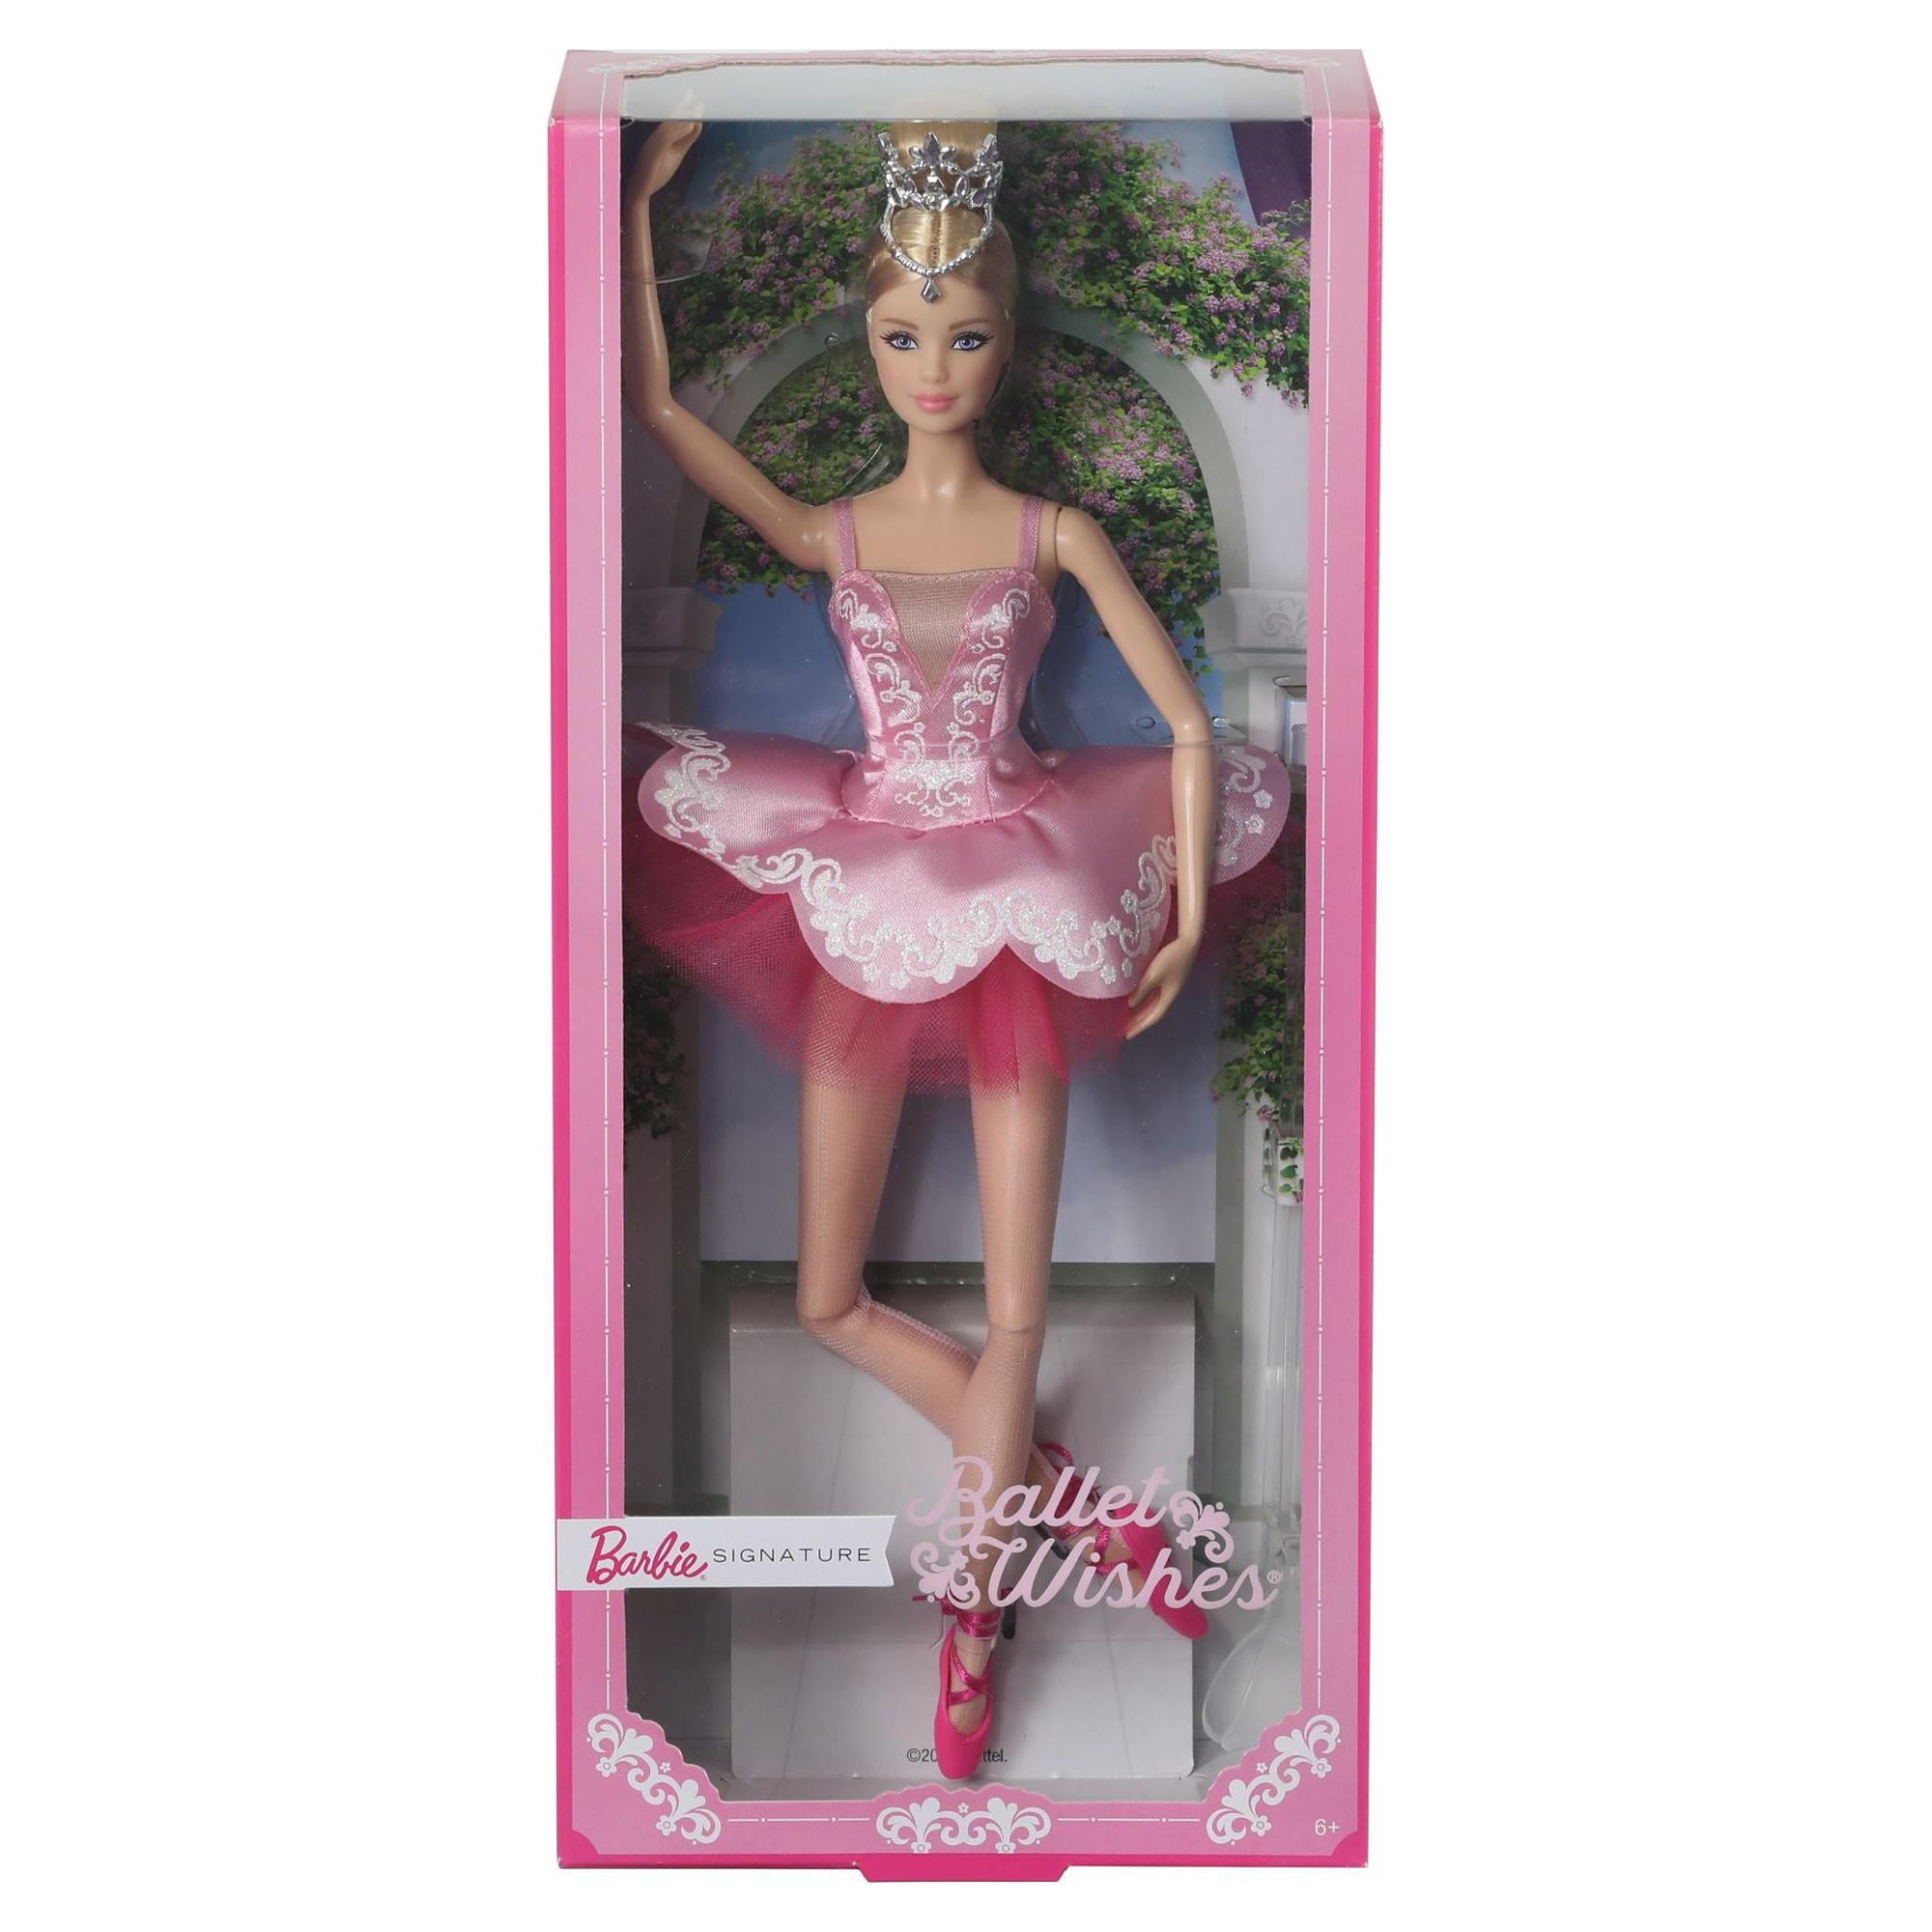 Barbie Signature Wearing Olds And Up Tiara, for Ballet Doll, 12-In Tutu, Pointe 6 And Shoes Approx. Wishes Year